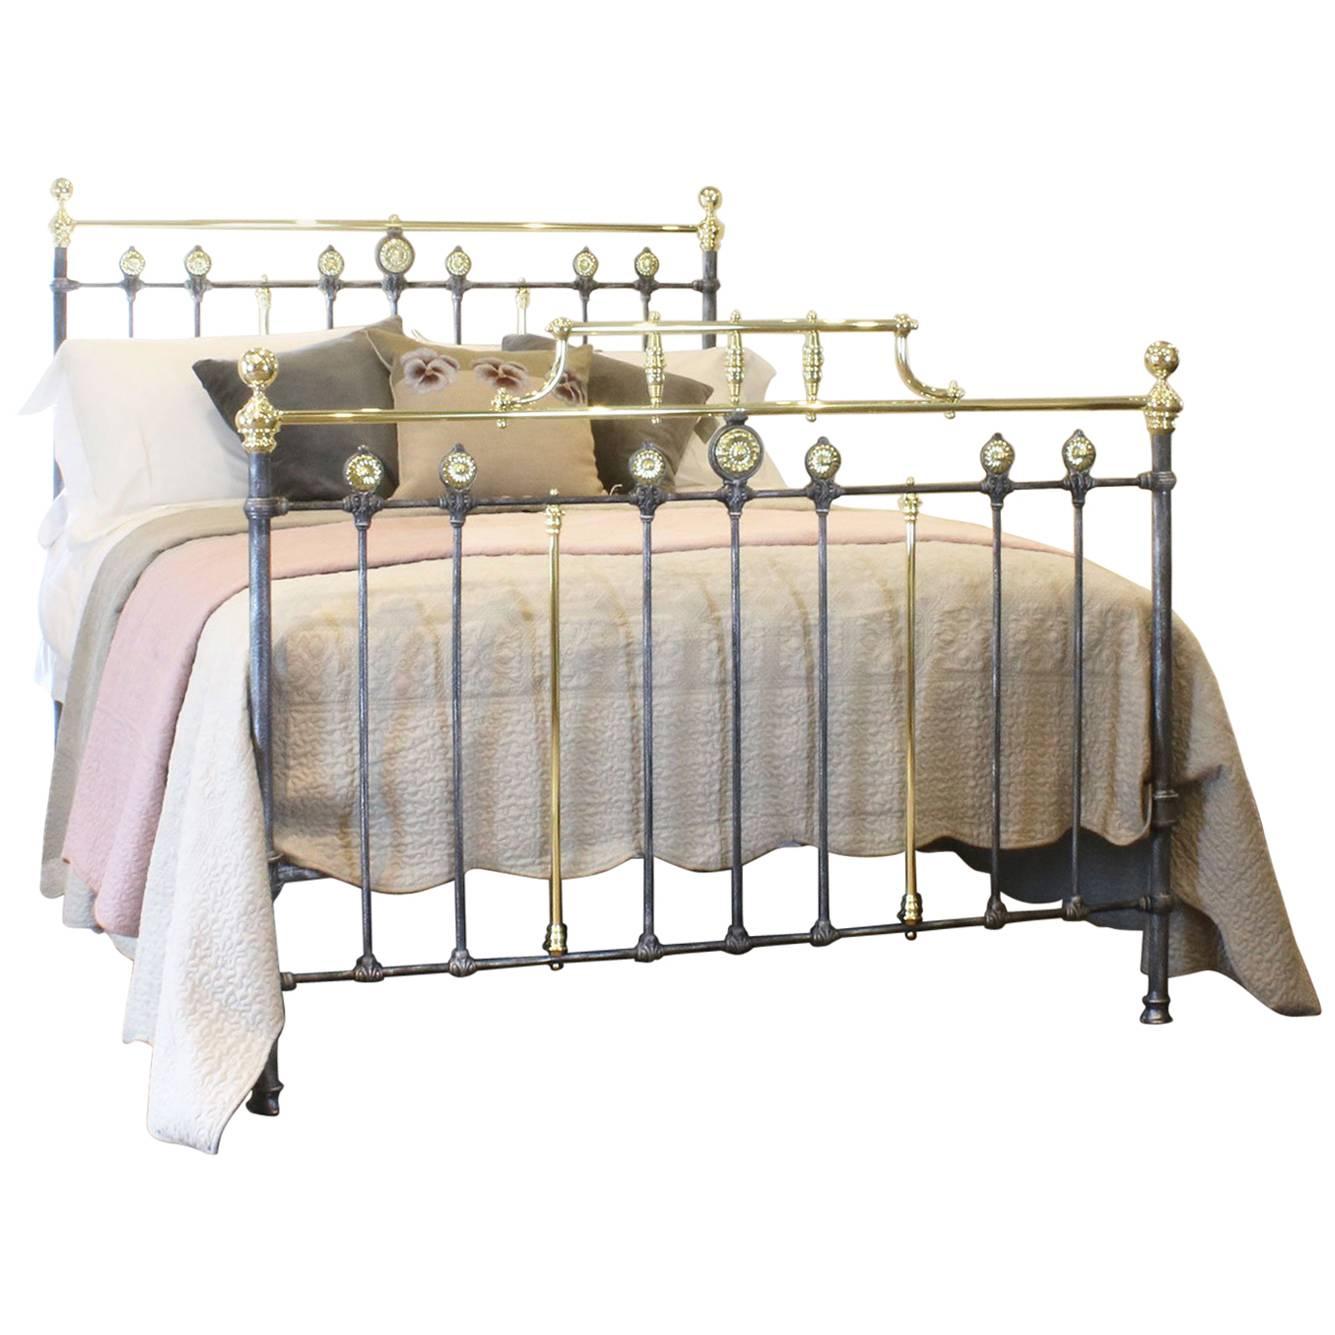 Brass and Iron Decorative Bedstead in Charcoal, MK134